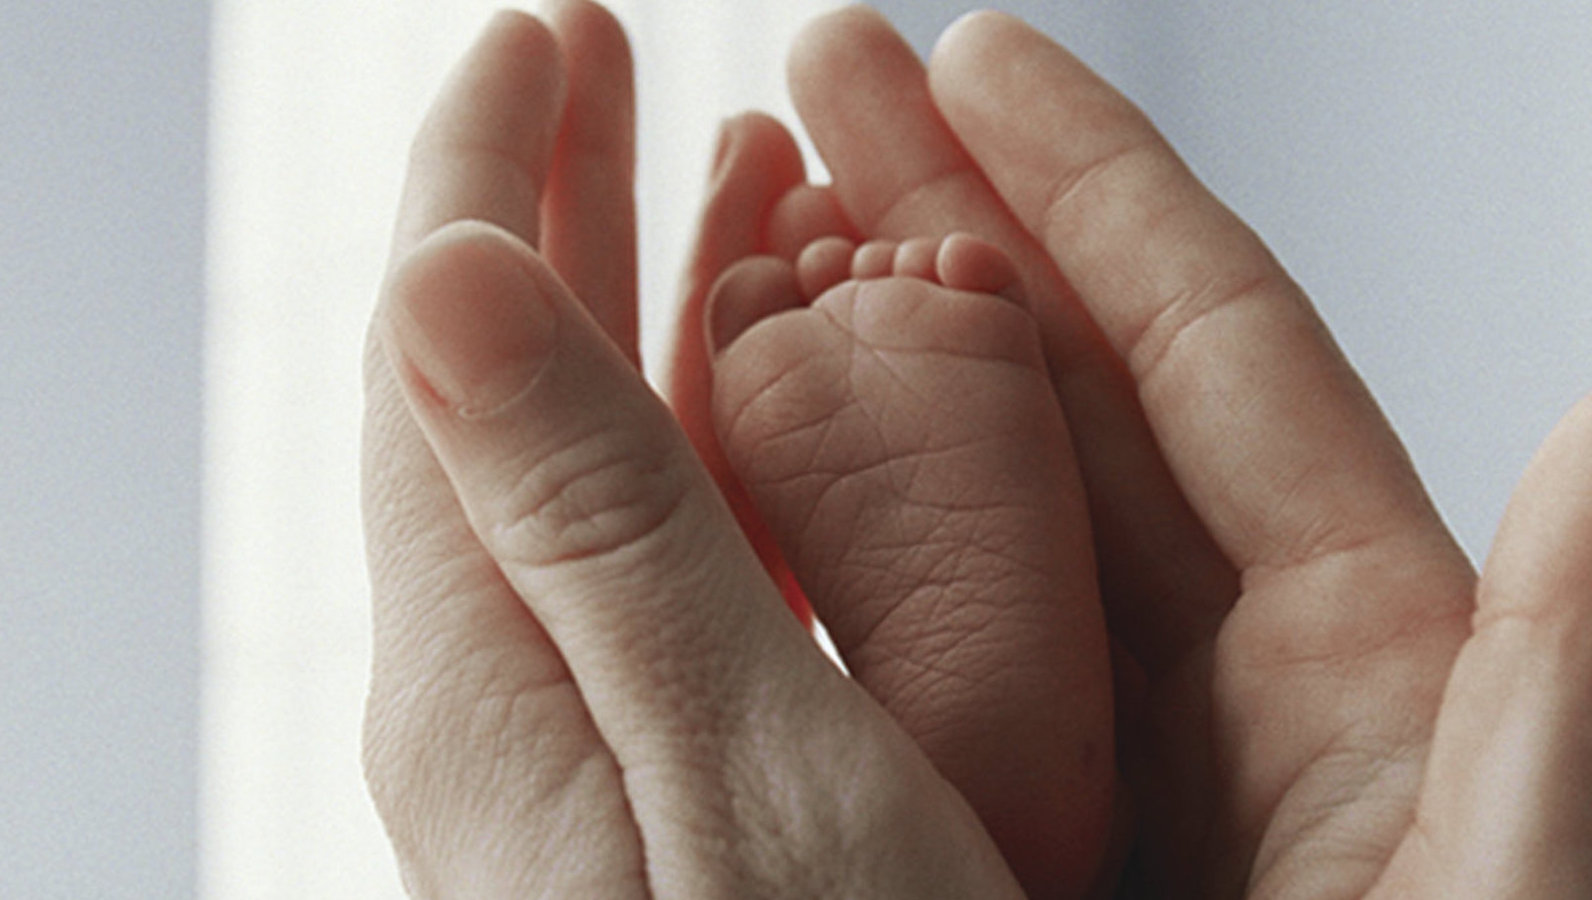 A tiny baby foot cradled in two adult hands in closeup